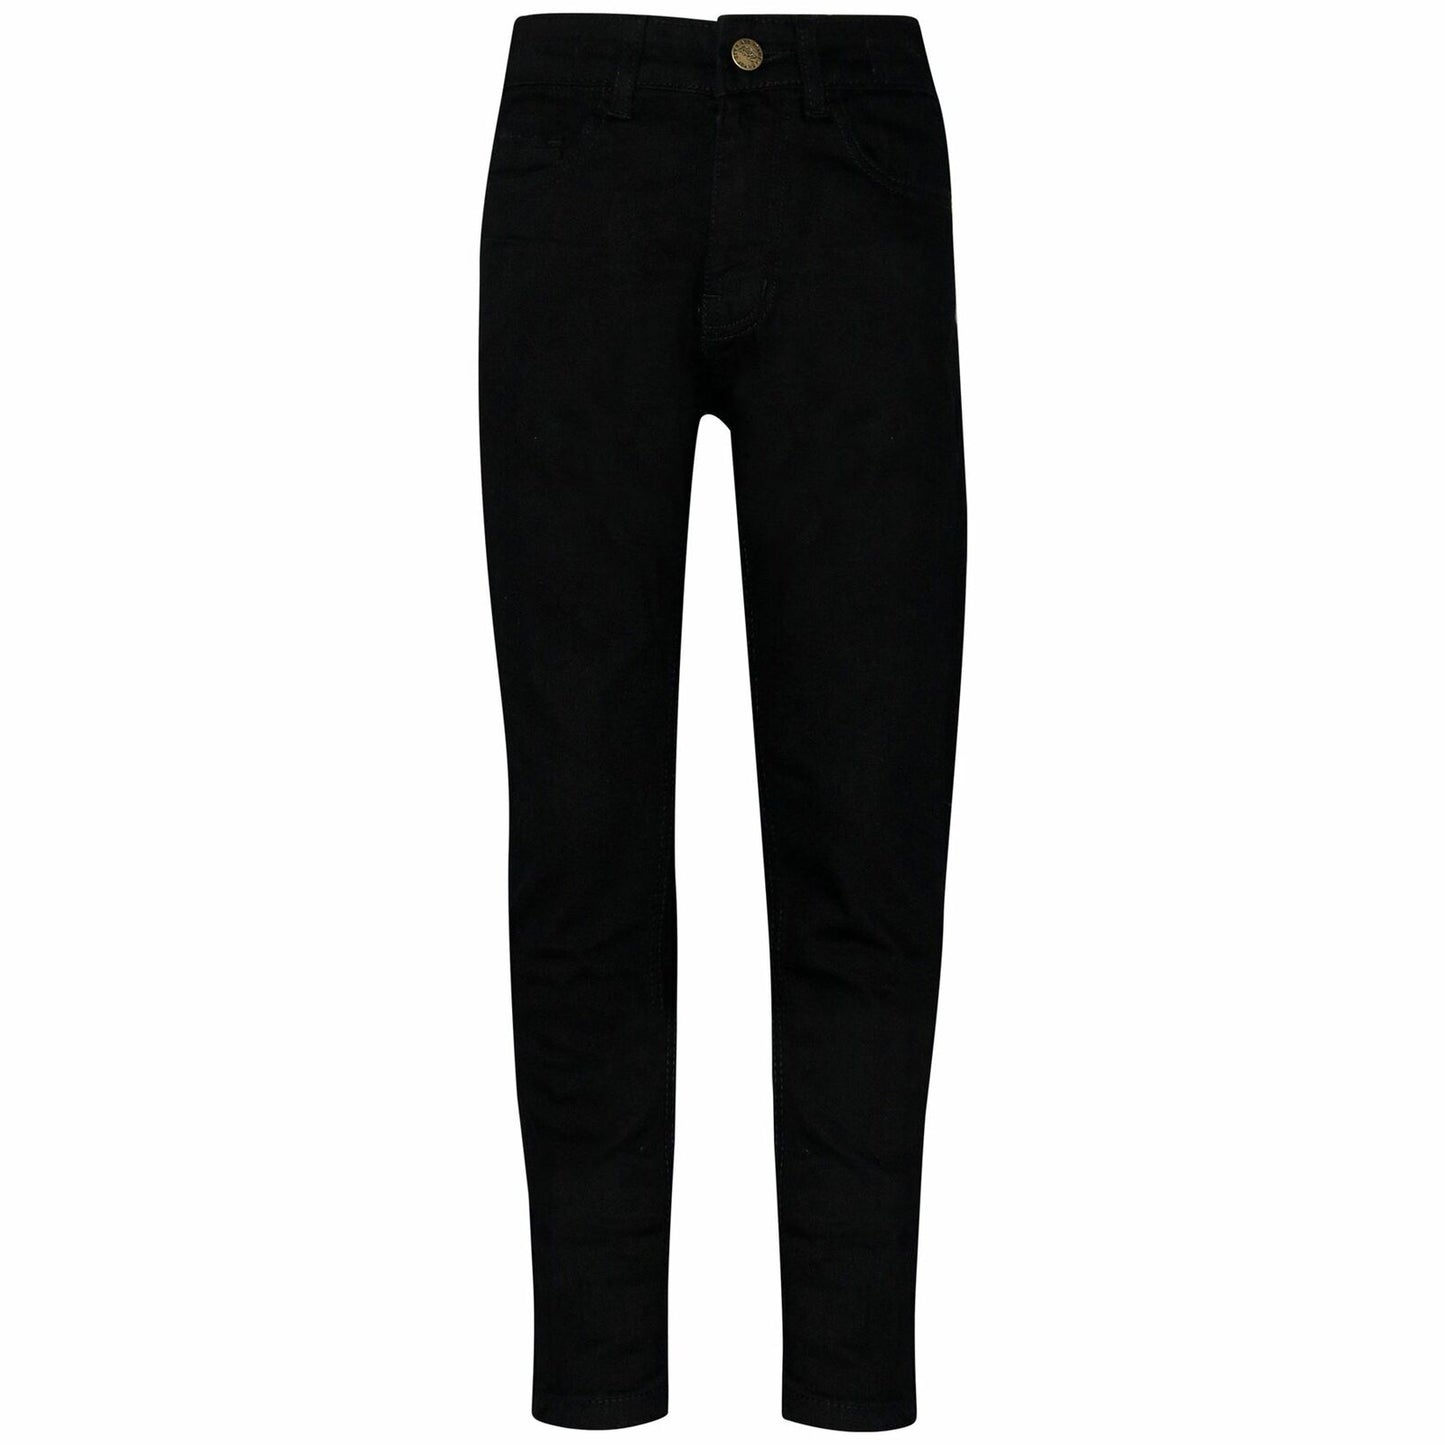 Girls Skinny Fit Black Denim Jeans. Available Ages 5-14.